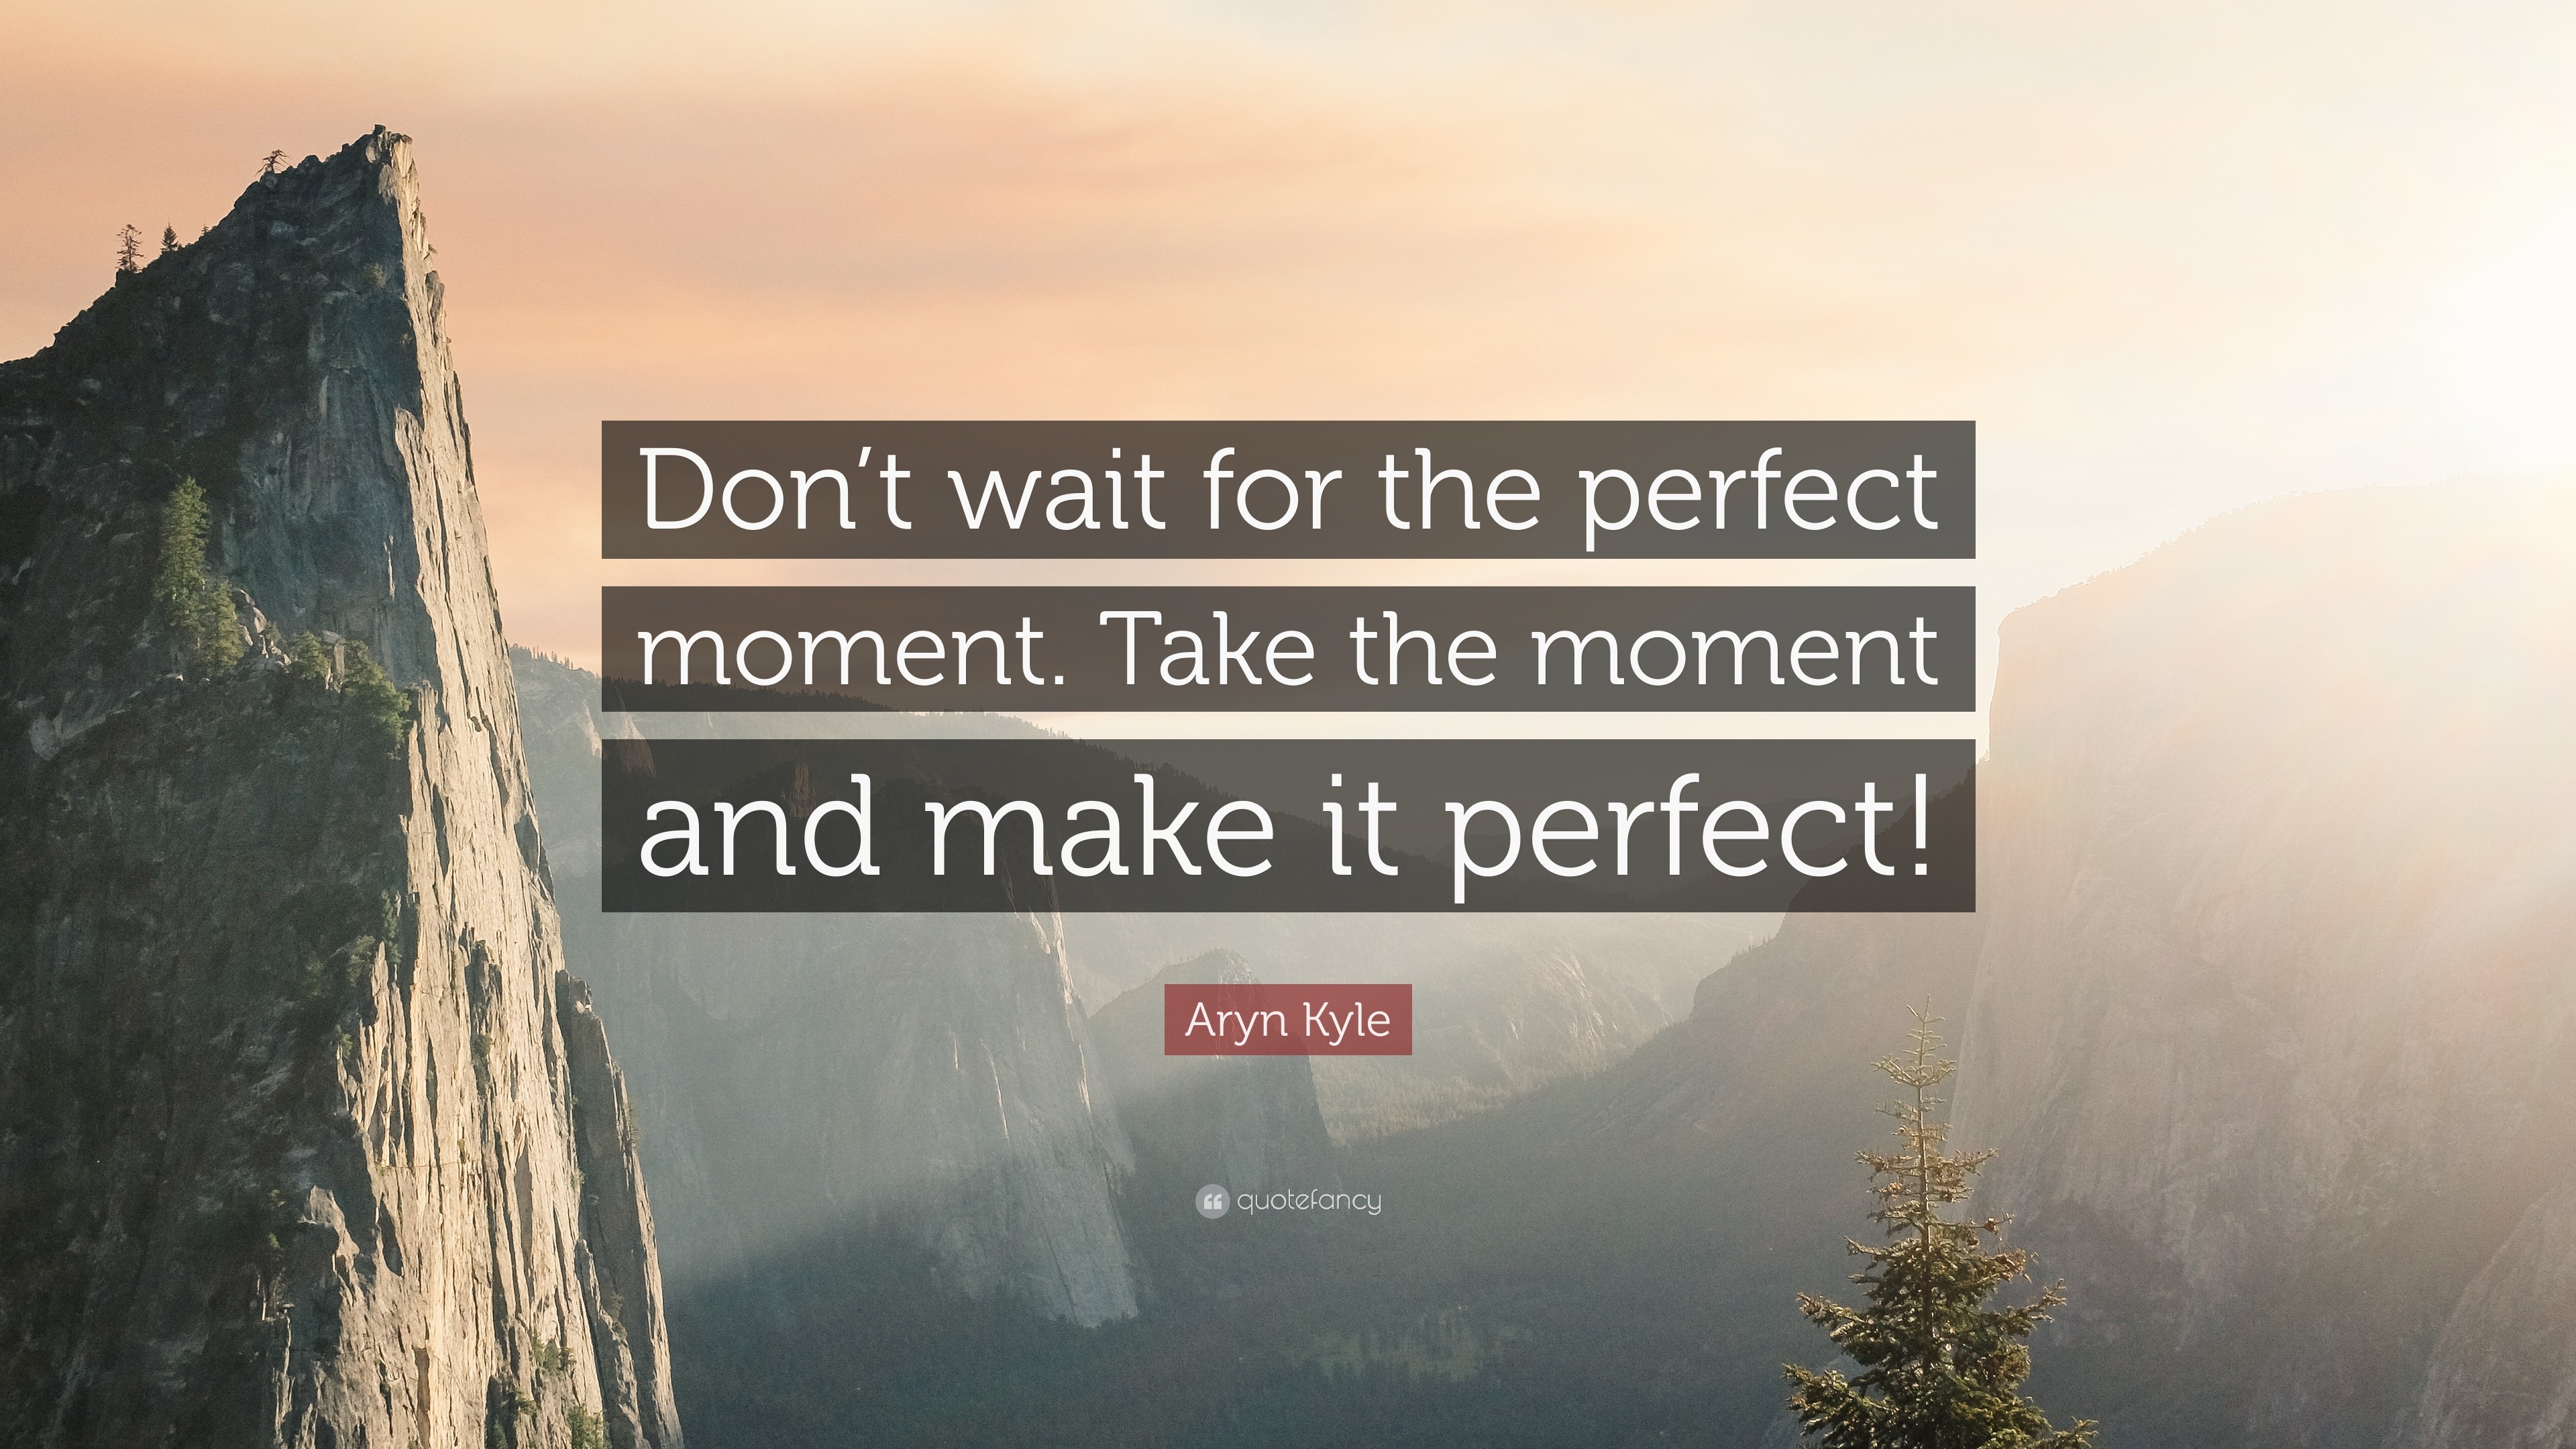 Aryn Kyle Quote: “Don't wait for the perfect moment. Take the